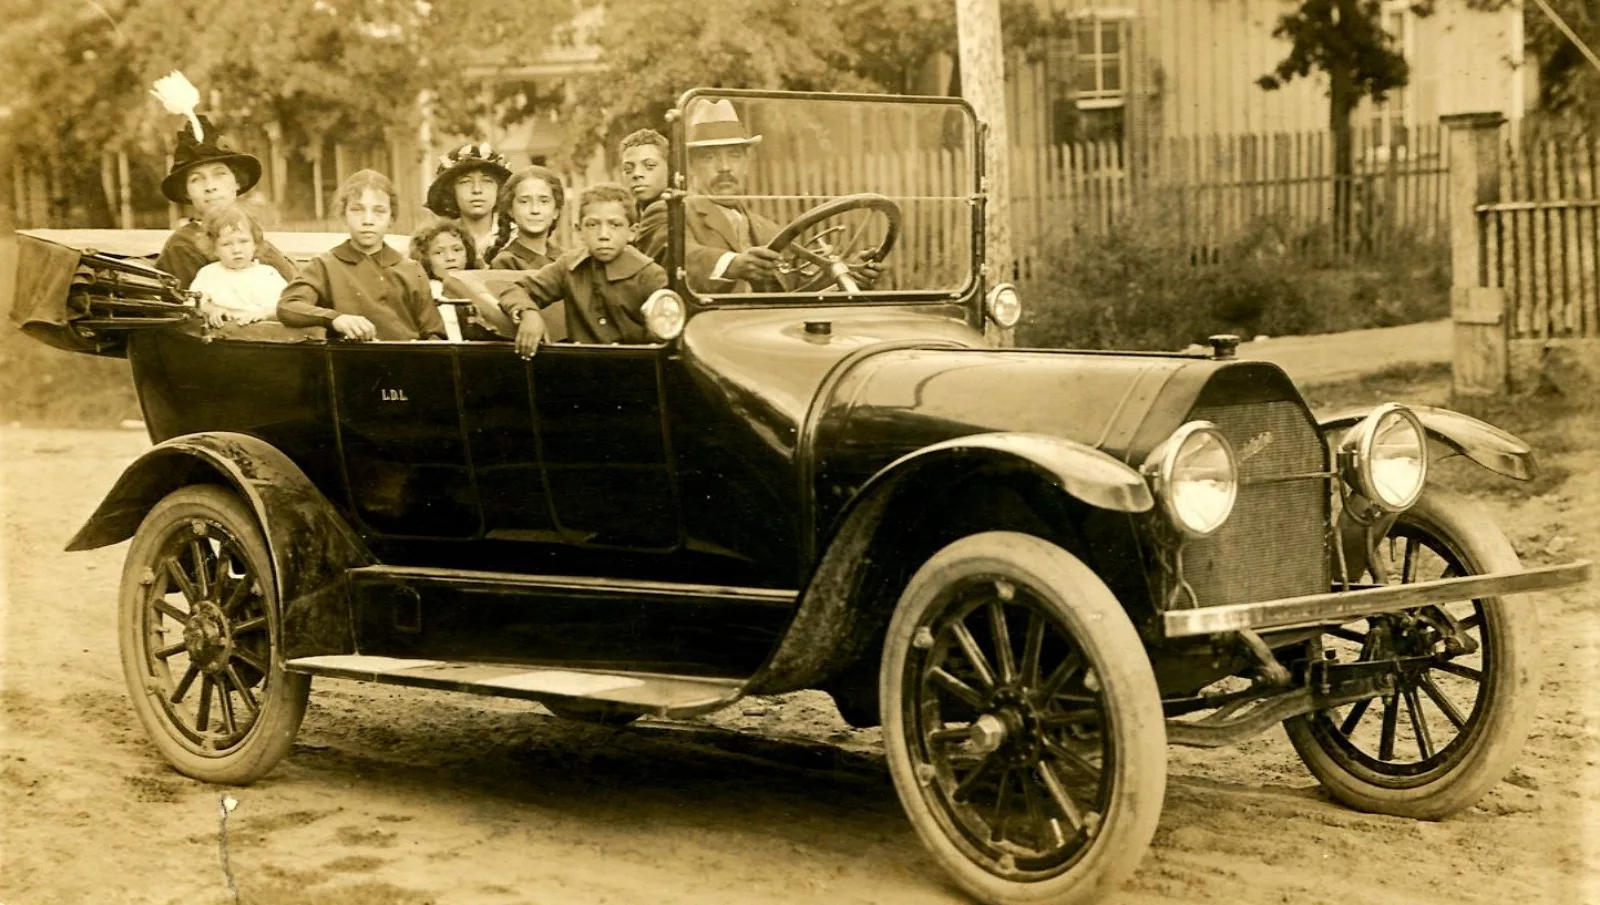 The Lyons family in their car, 1913. From L-R and relation to Eunice: Eva Sybil Carrington Lyons (mother), Eva Gwendolyn Lyons (sister), Eunice Lavinia Lyons, Emma A. Lyons (sister), Louise Lyons (sister), Maxine Moore (cousin), Woodward Cecil “Joe” Lyons (brother), Wendell C “Big Brother” Lyons (brother), L.D. Lyons (father).